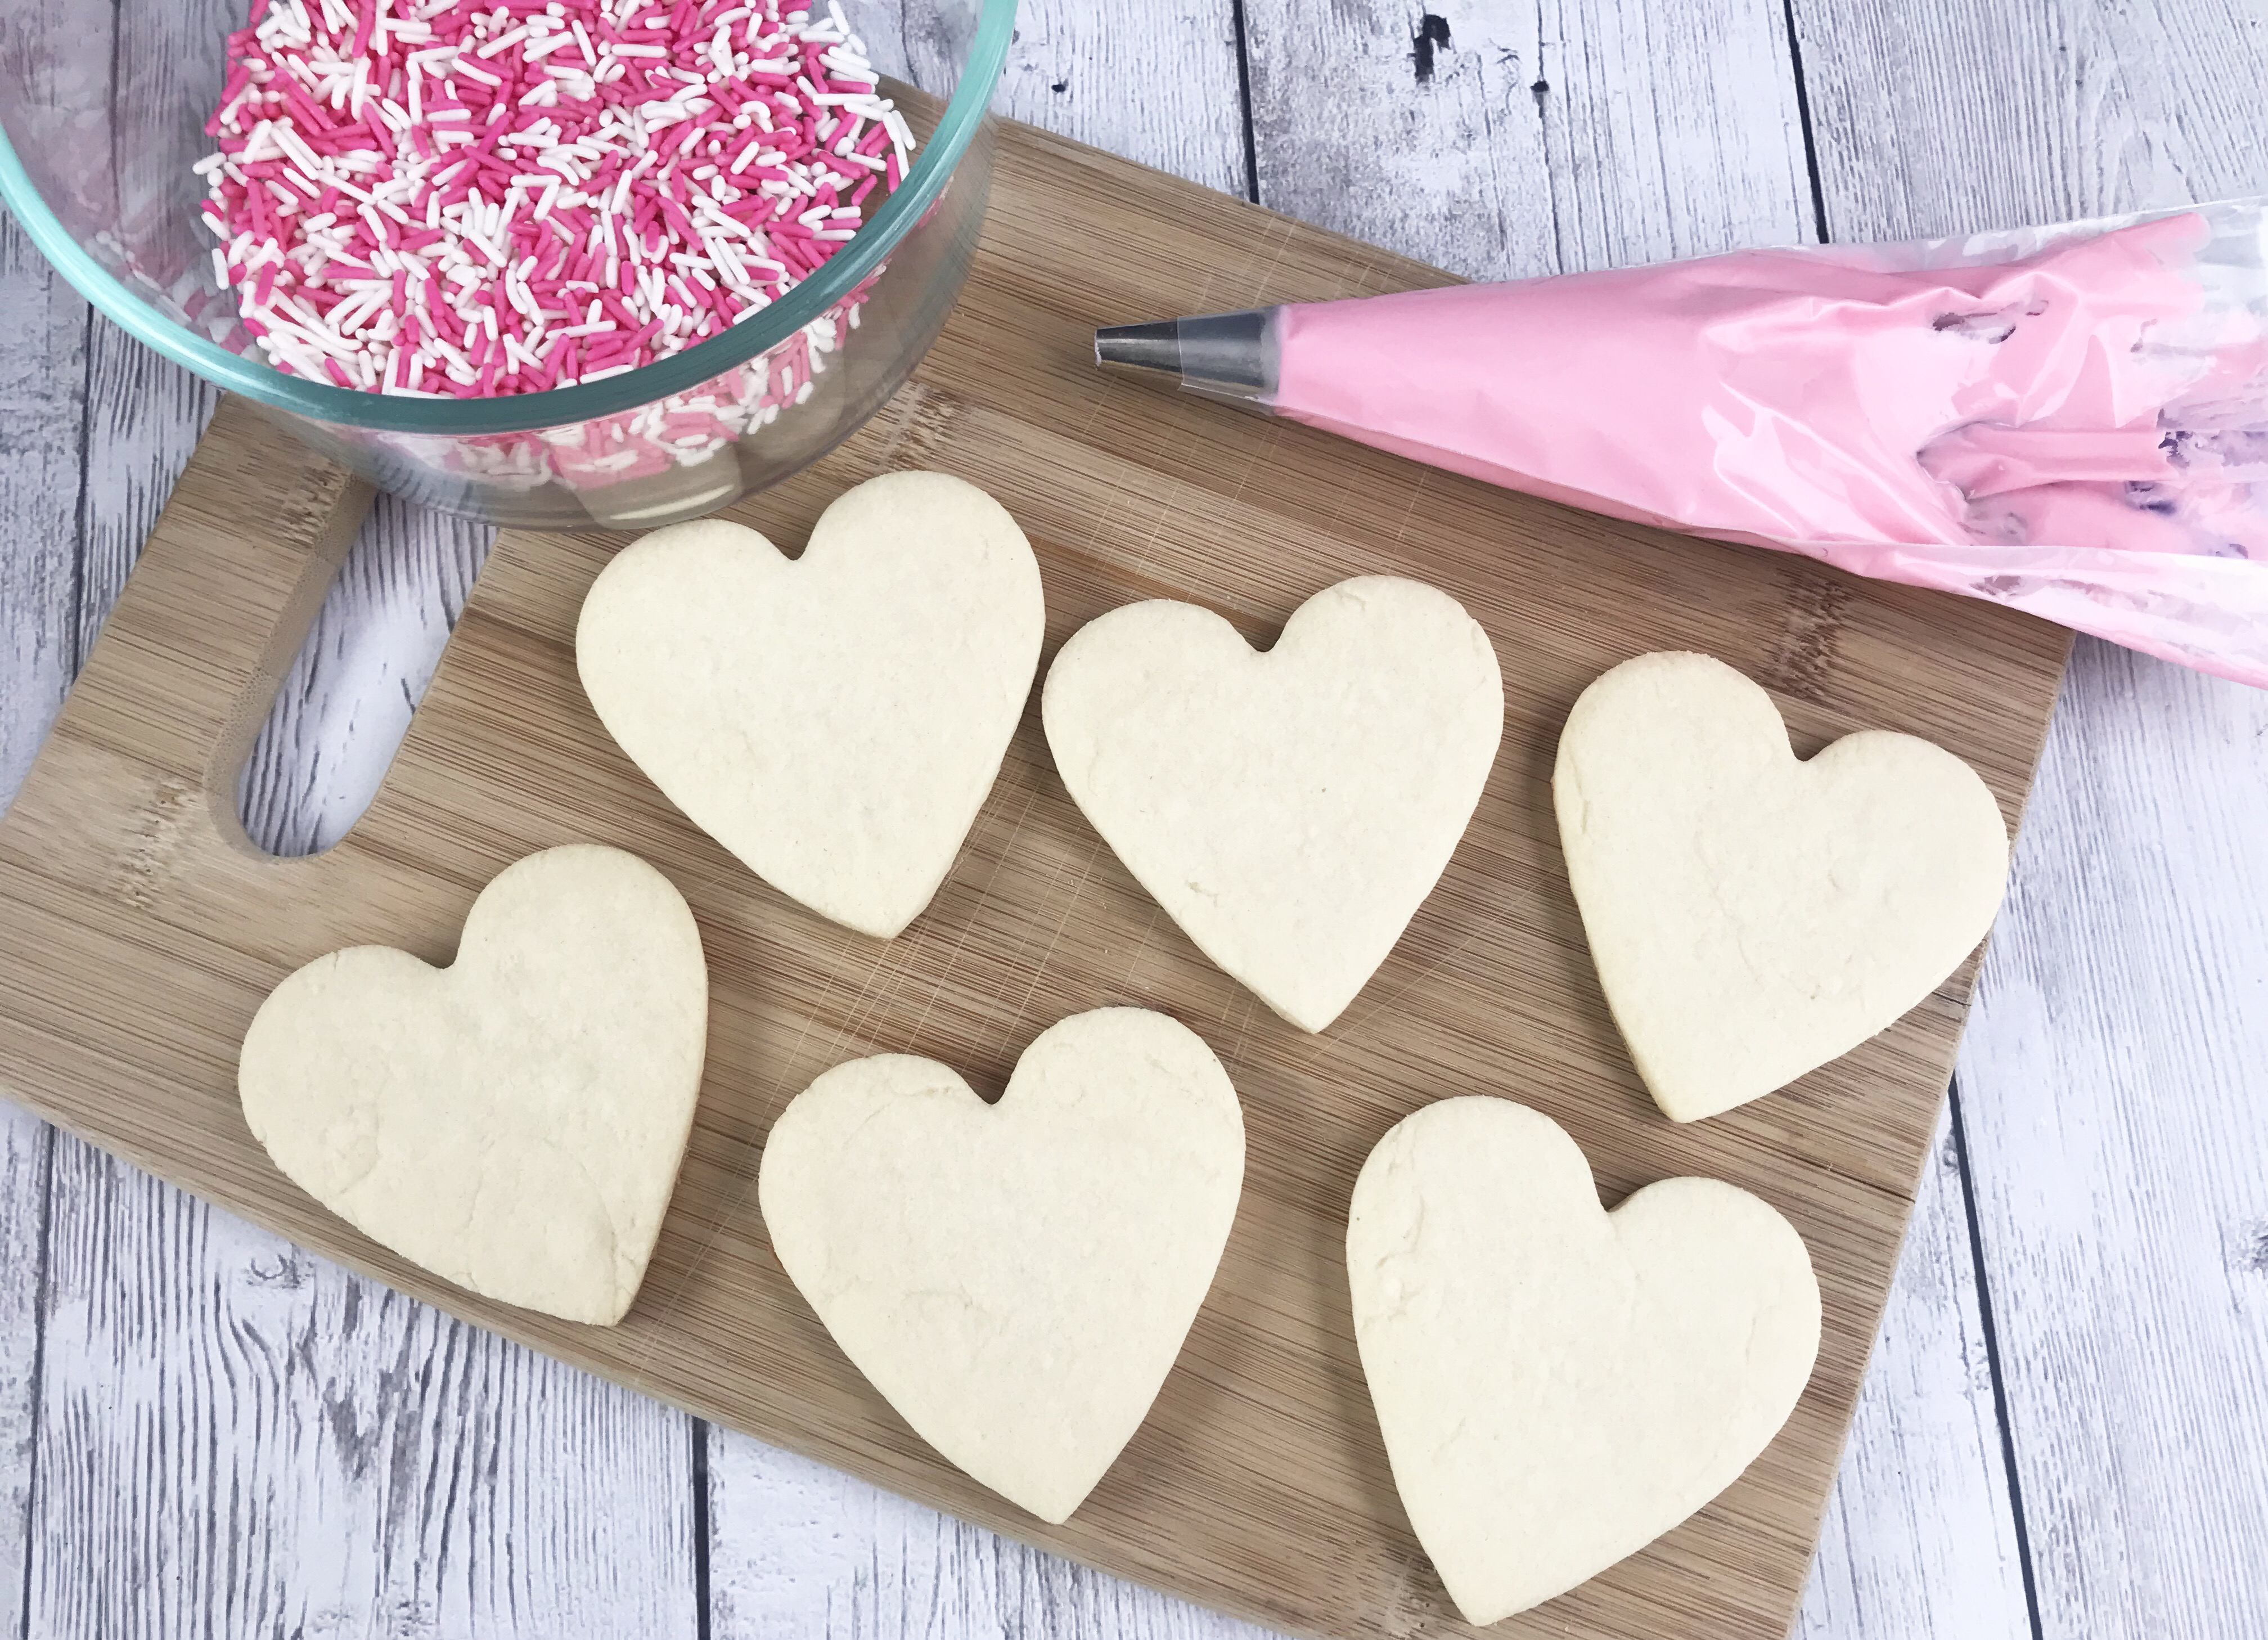 Cooled heart shaped sugar cookies ready to decorate